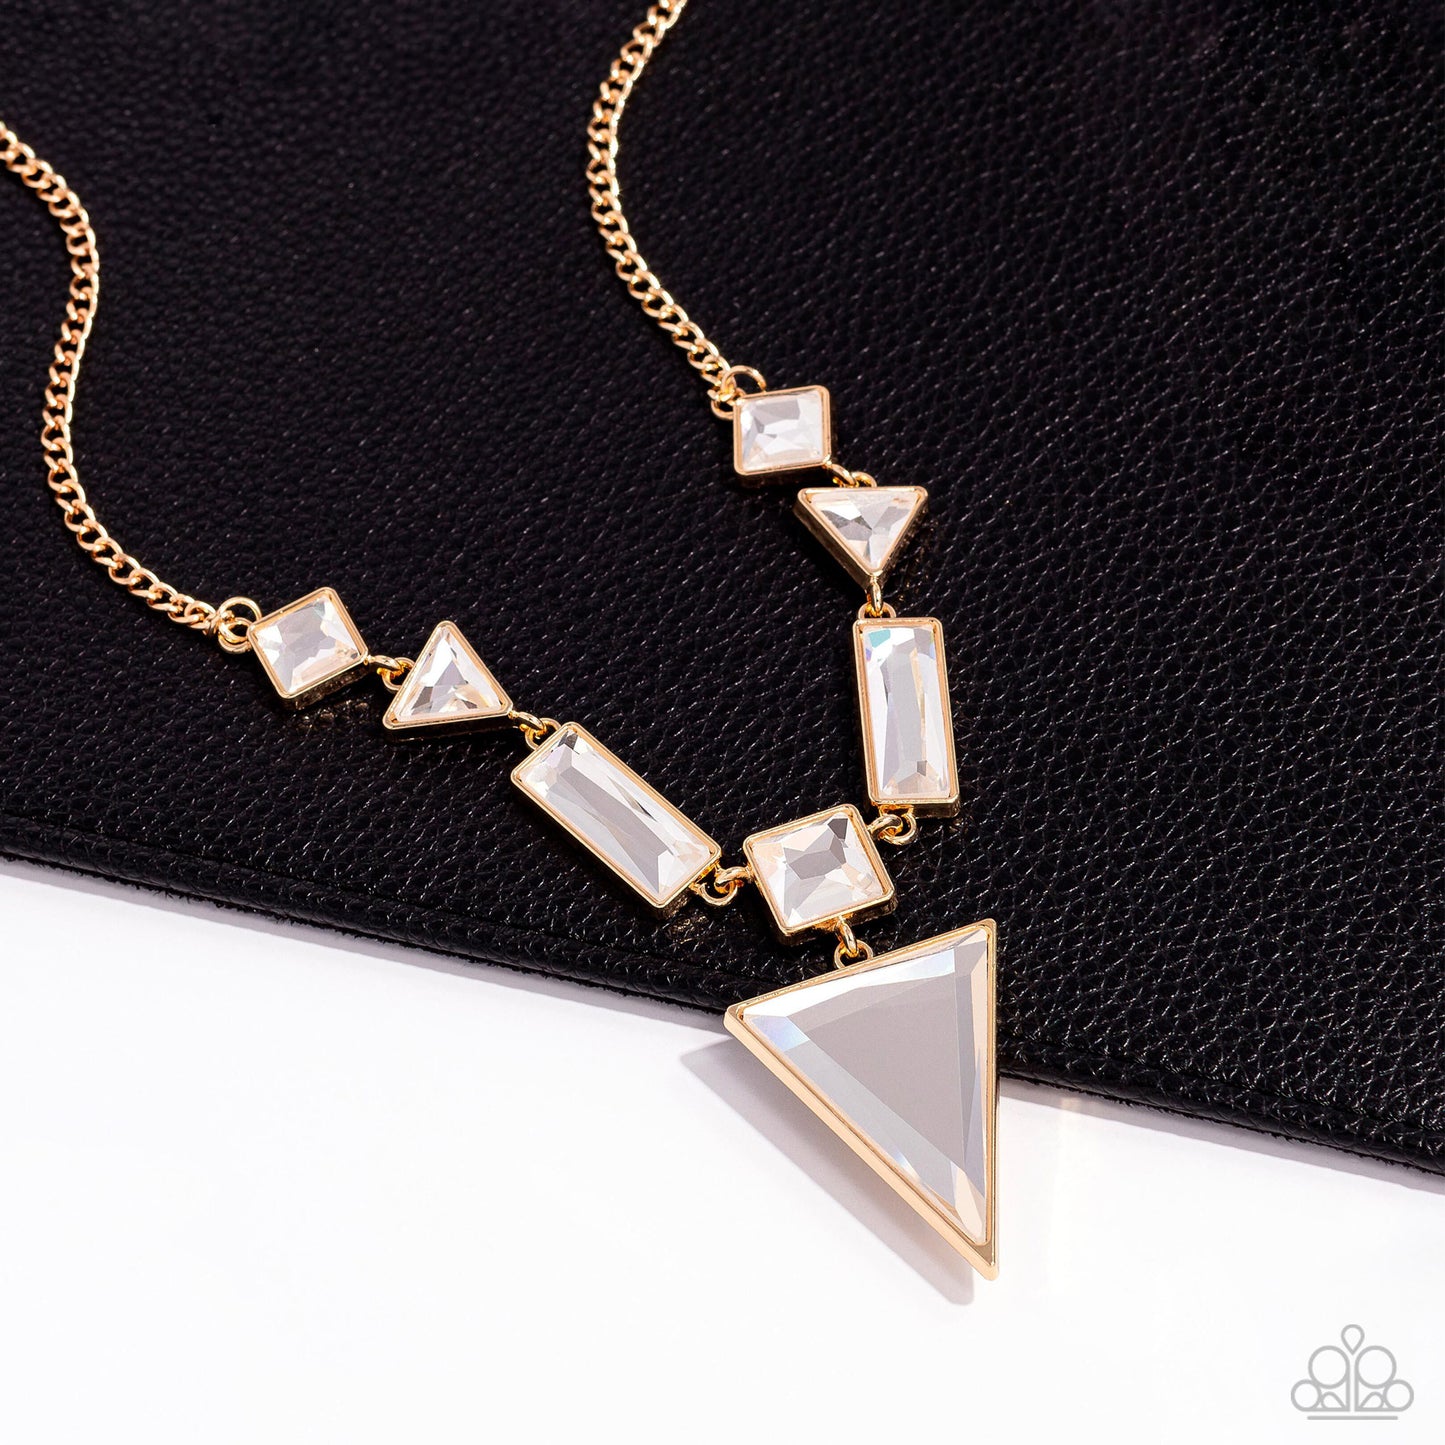 Fetchingly Fierce Gold-Necklace